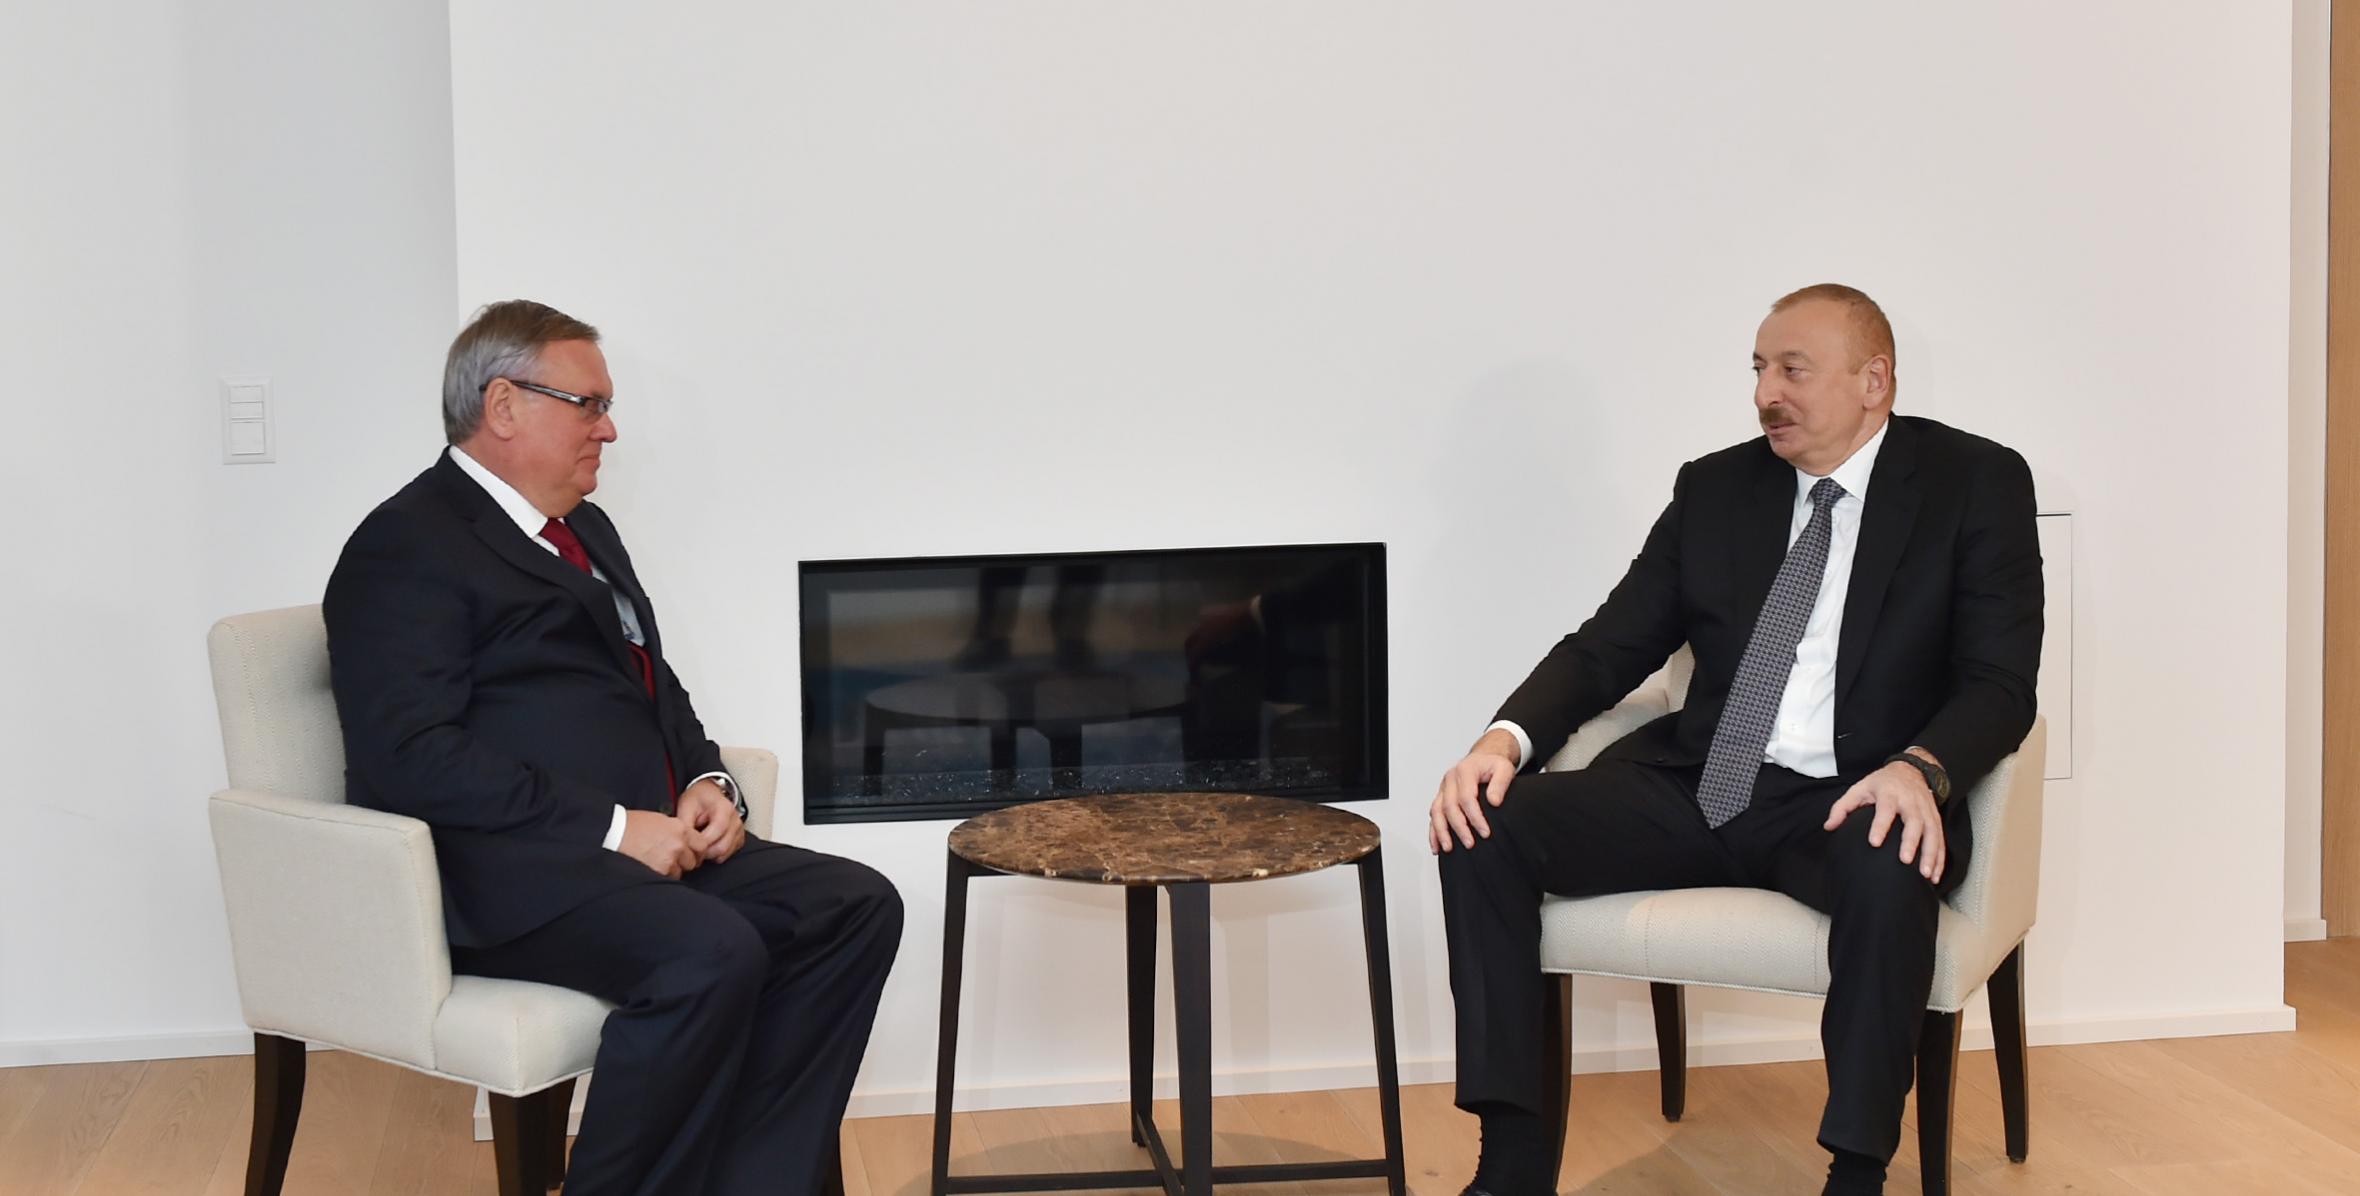 Ilham Aliyev has embarked on a working visit to the Swiss Confederation